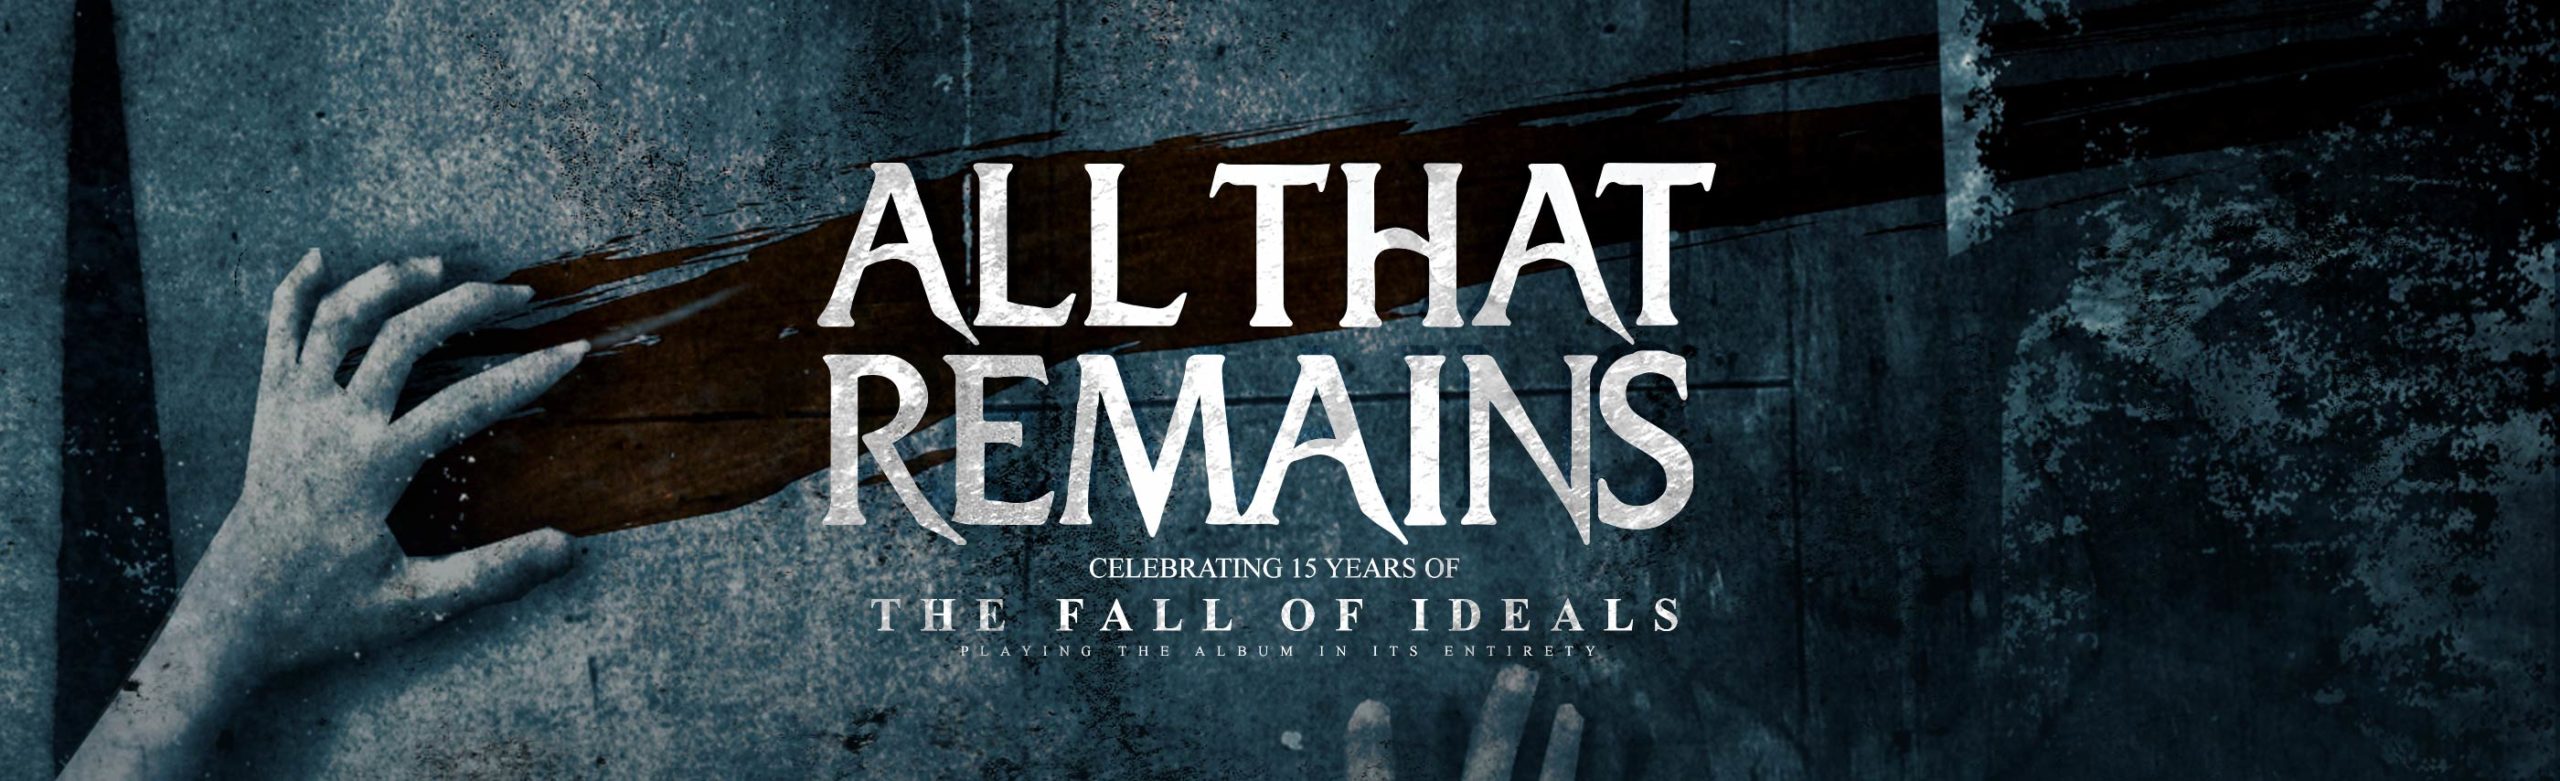 All That Remains to Celebrate 15 Years of ‘The Fall of Ideals’ in Bozeman Image